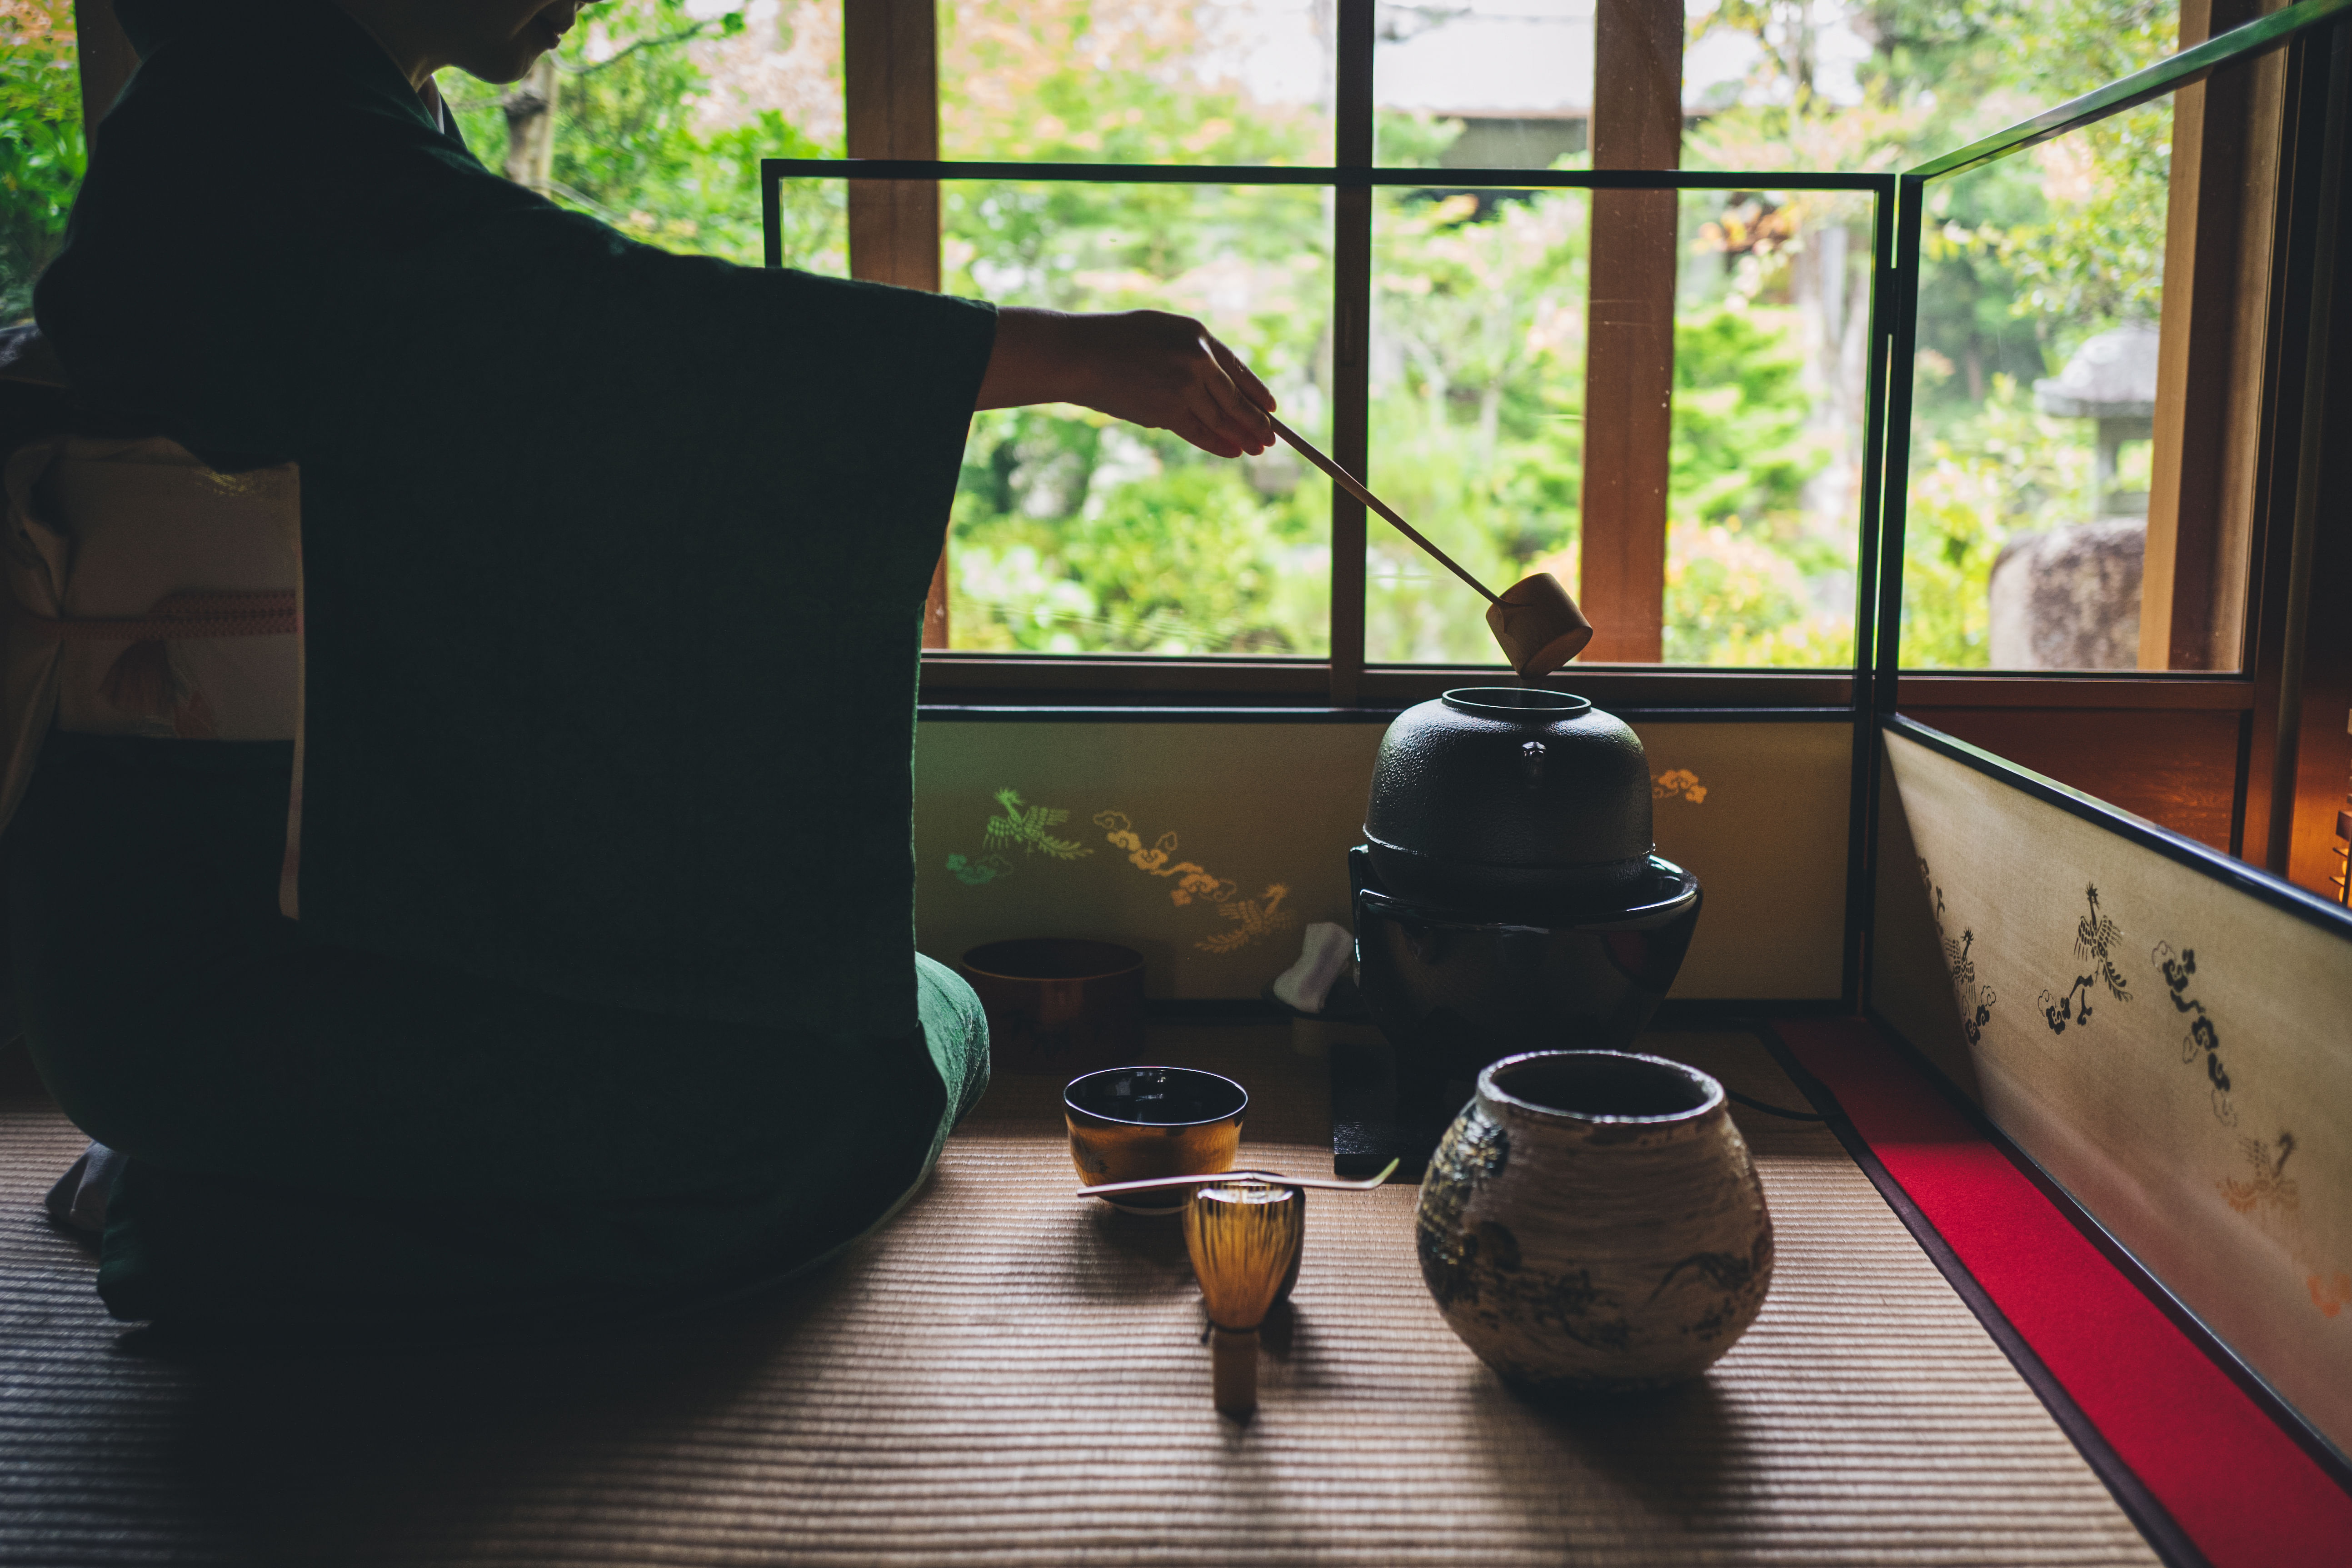 Private tea Ceremony in Kyoto FLOWER TEAHOUSE